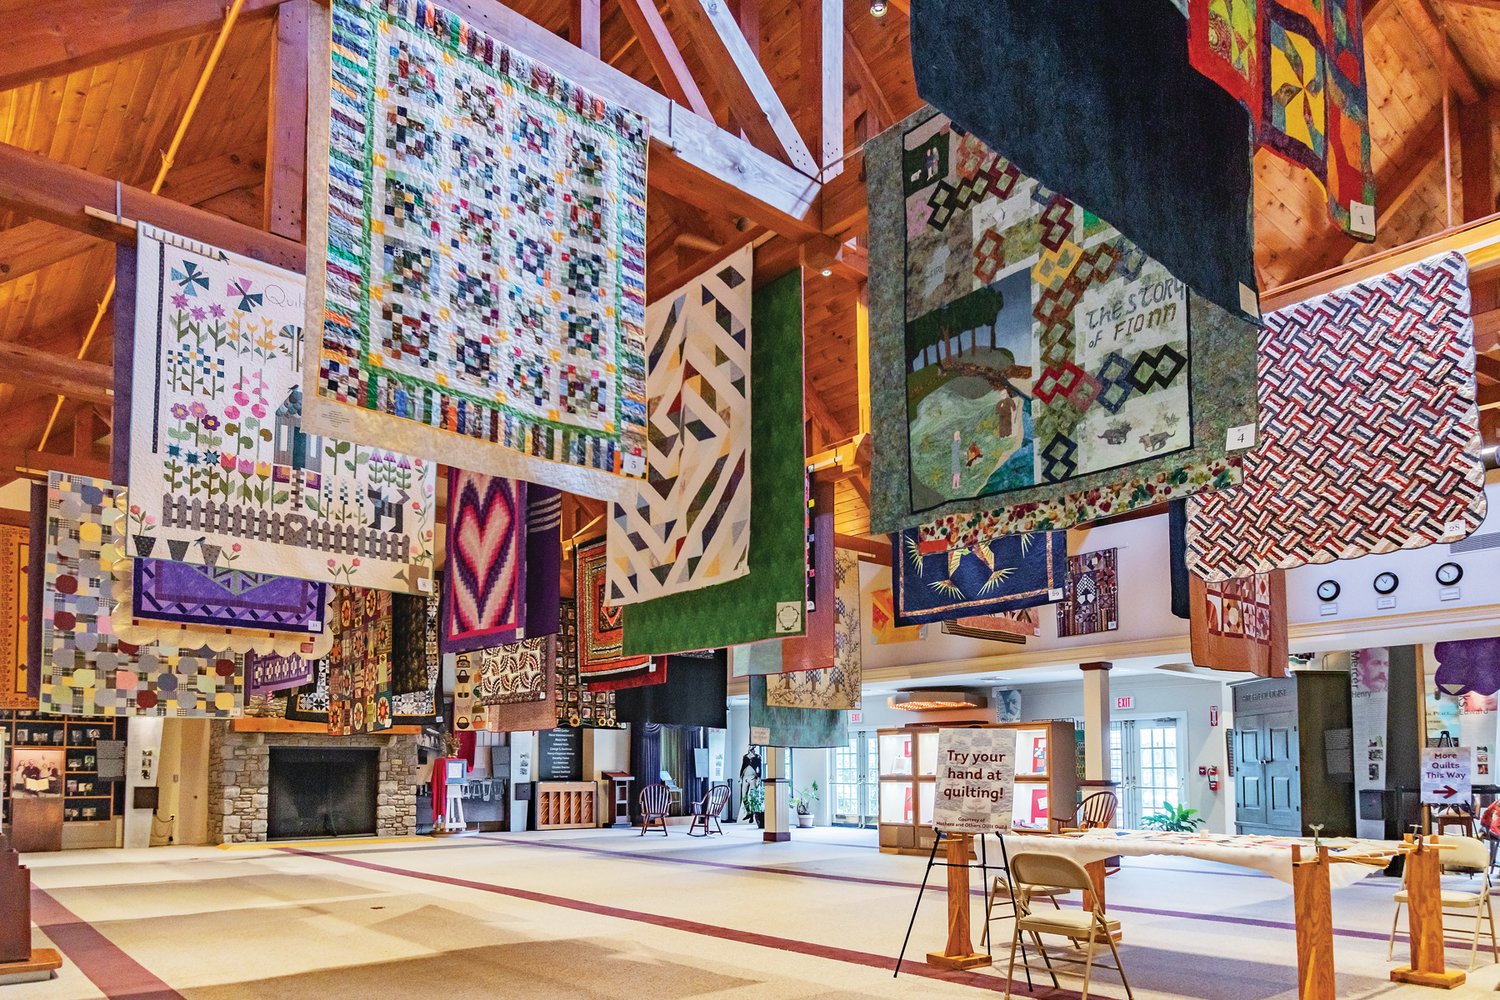 Quilts hang from the rafters at the Bucks County Visitor Center in Bensalem during the 2018 Bucks County Quilt Show. This year’s event begins June 30.